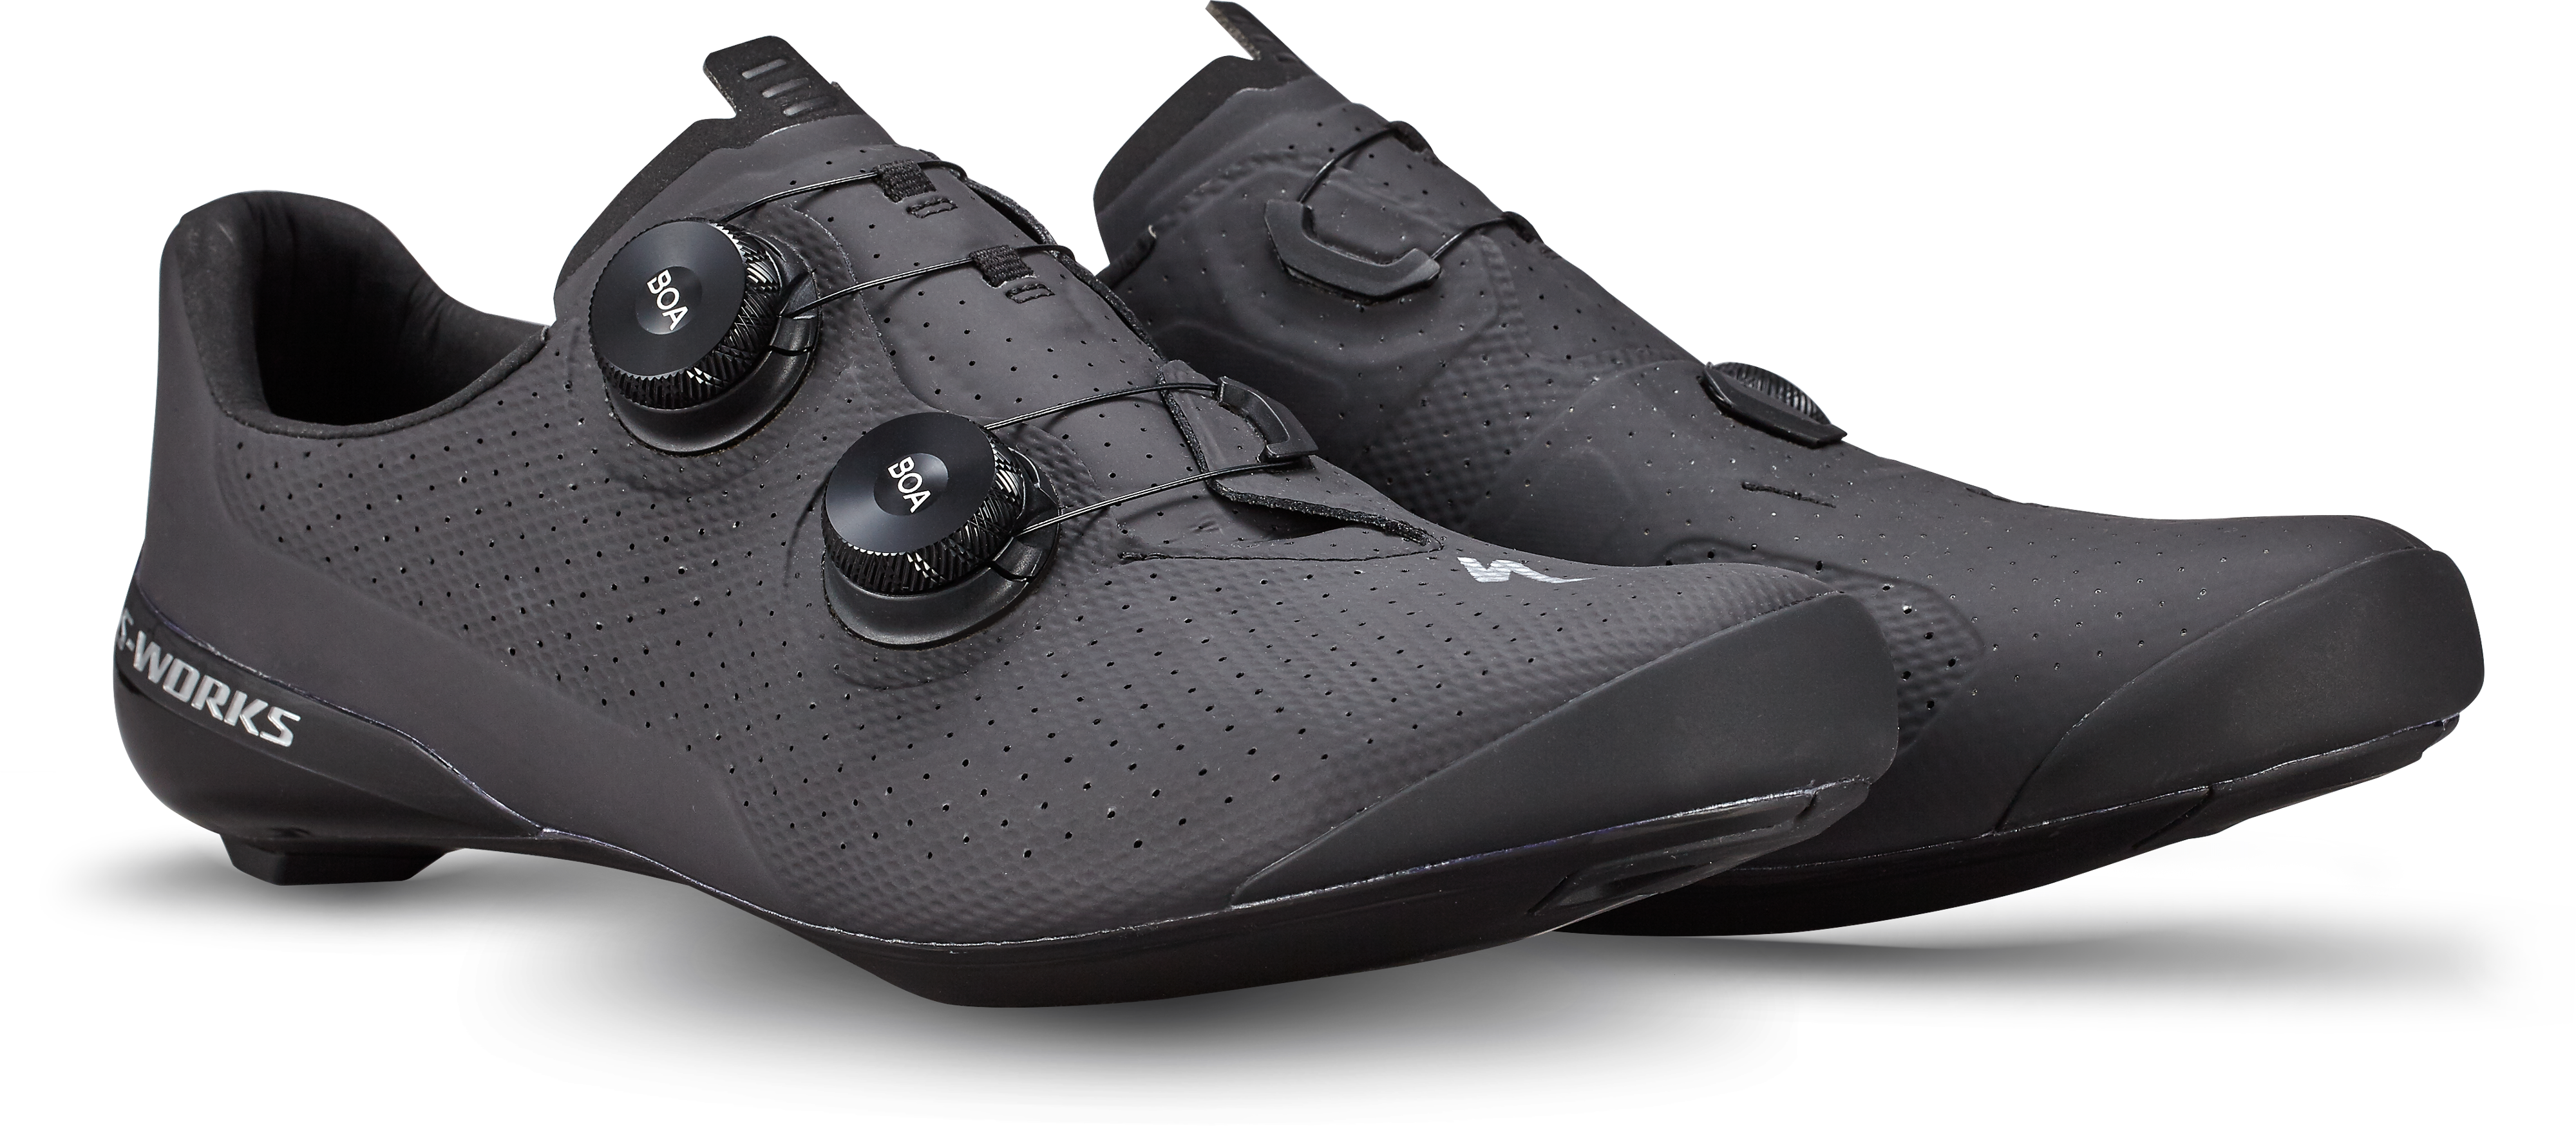 S-WORKS TORCH ROAD SHOES BLK 45(45 (29cm) ブラック): シューズ